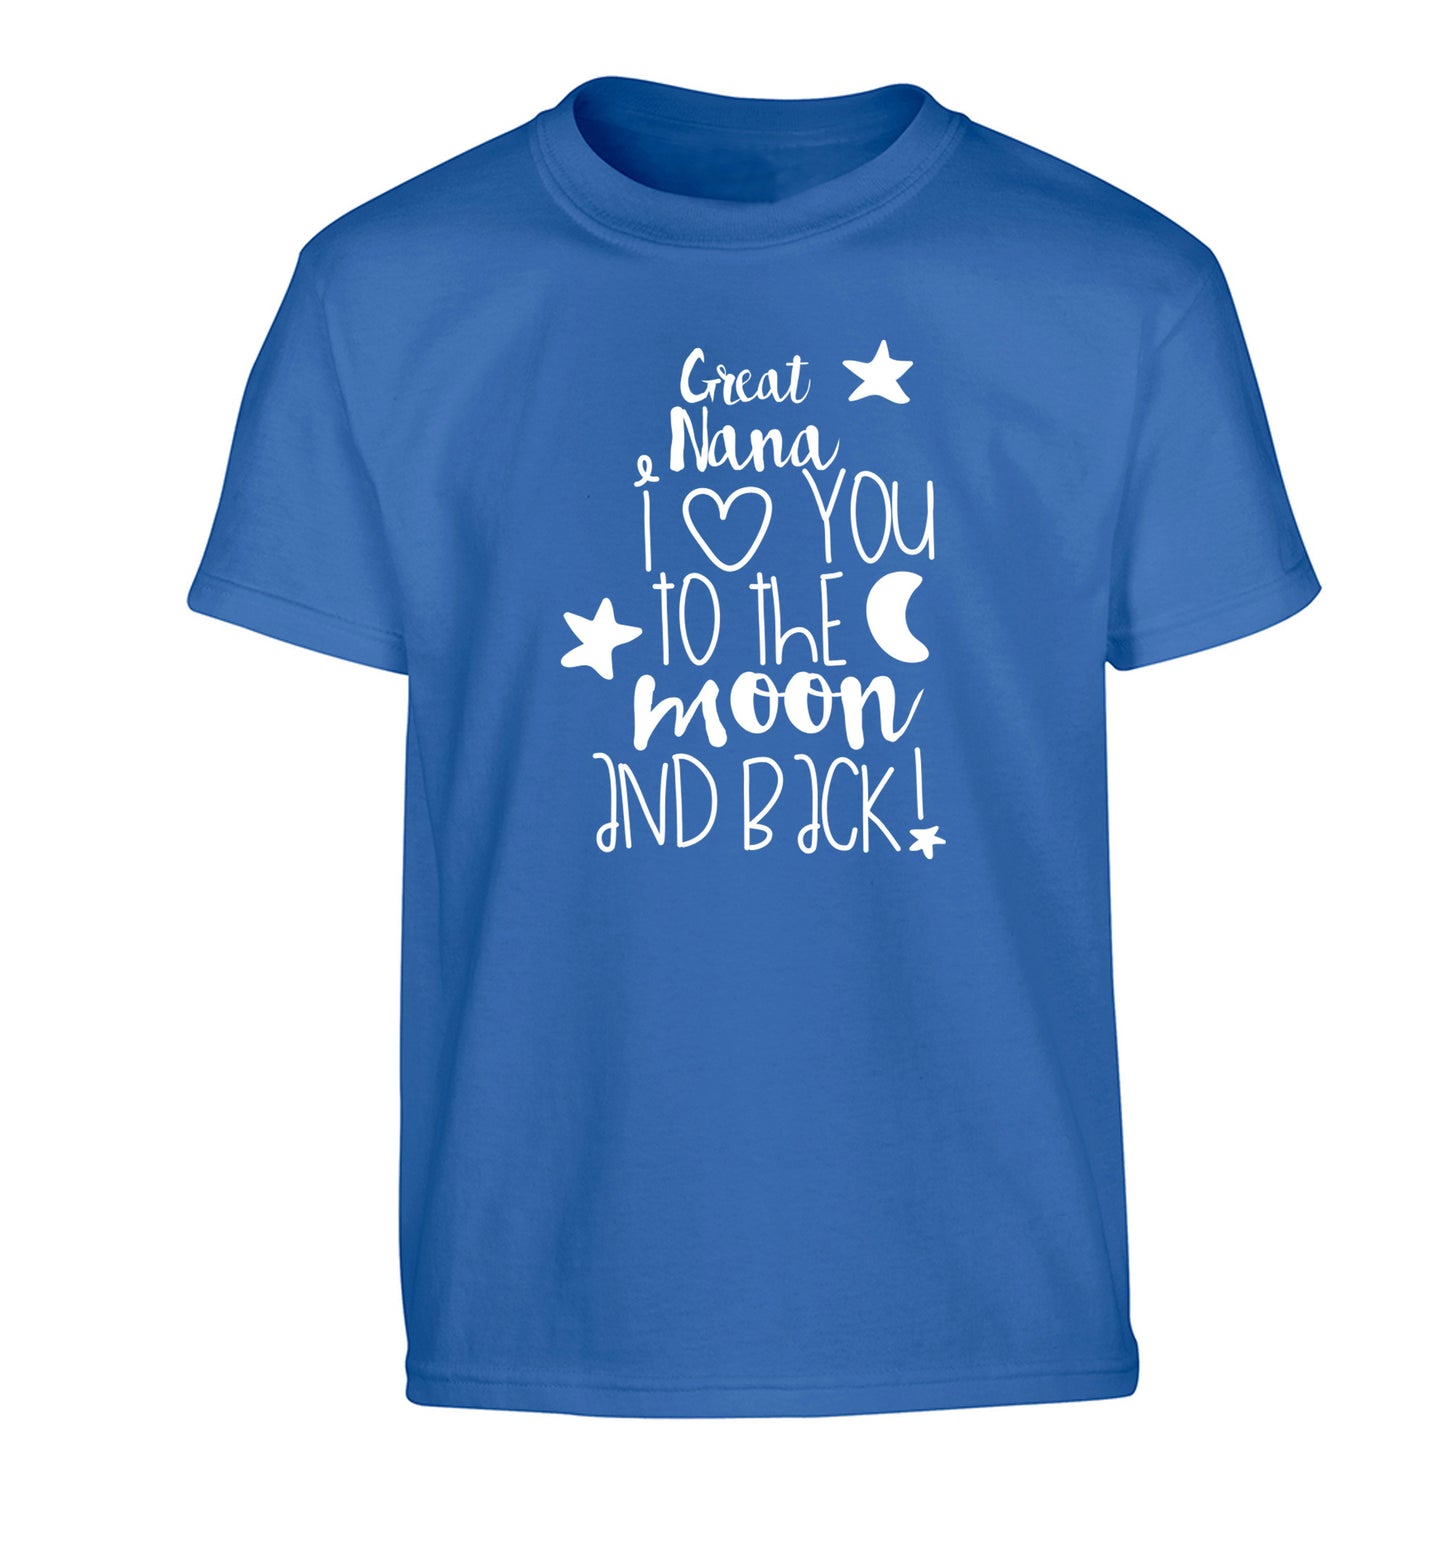 Great Nana I love you to the moon and back Children's blue Tshirt 12-14 Years